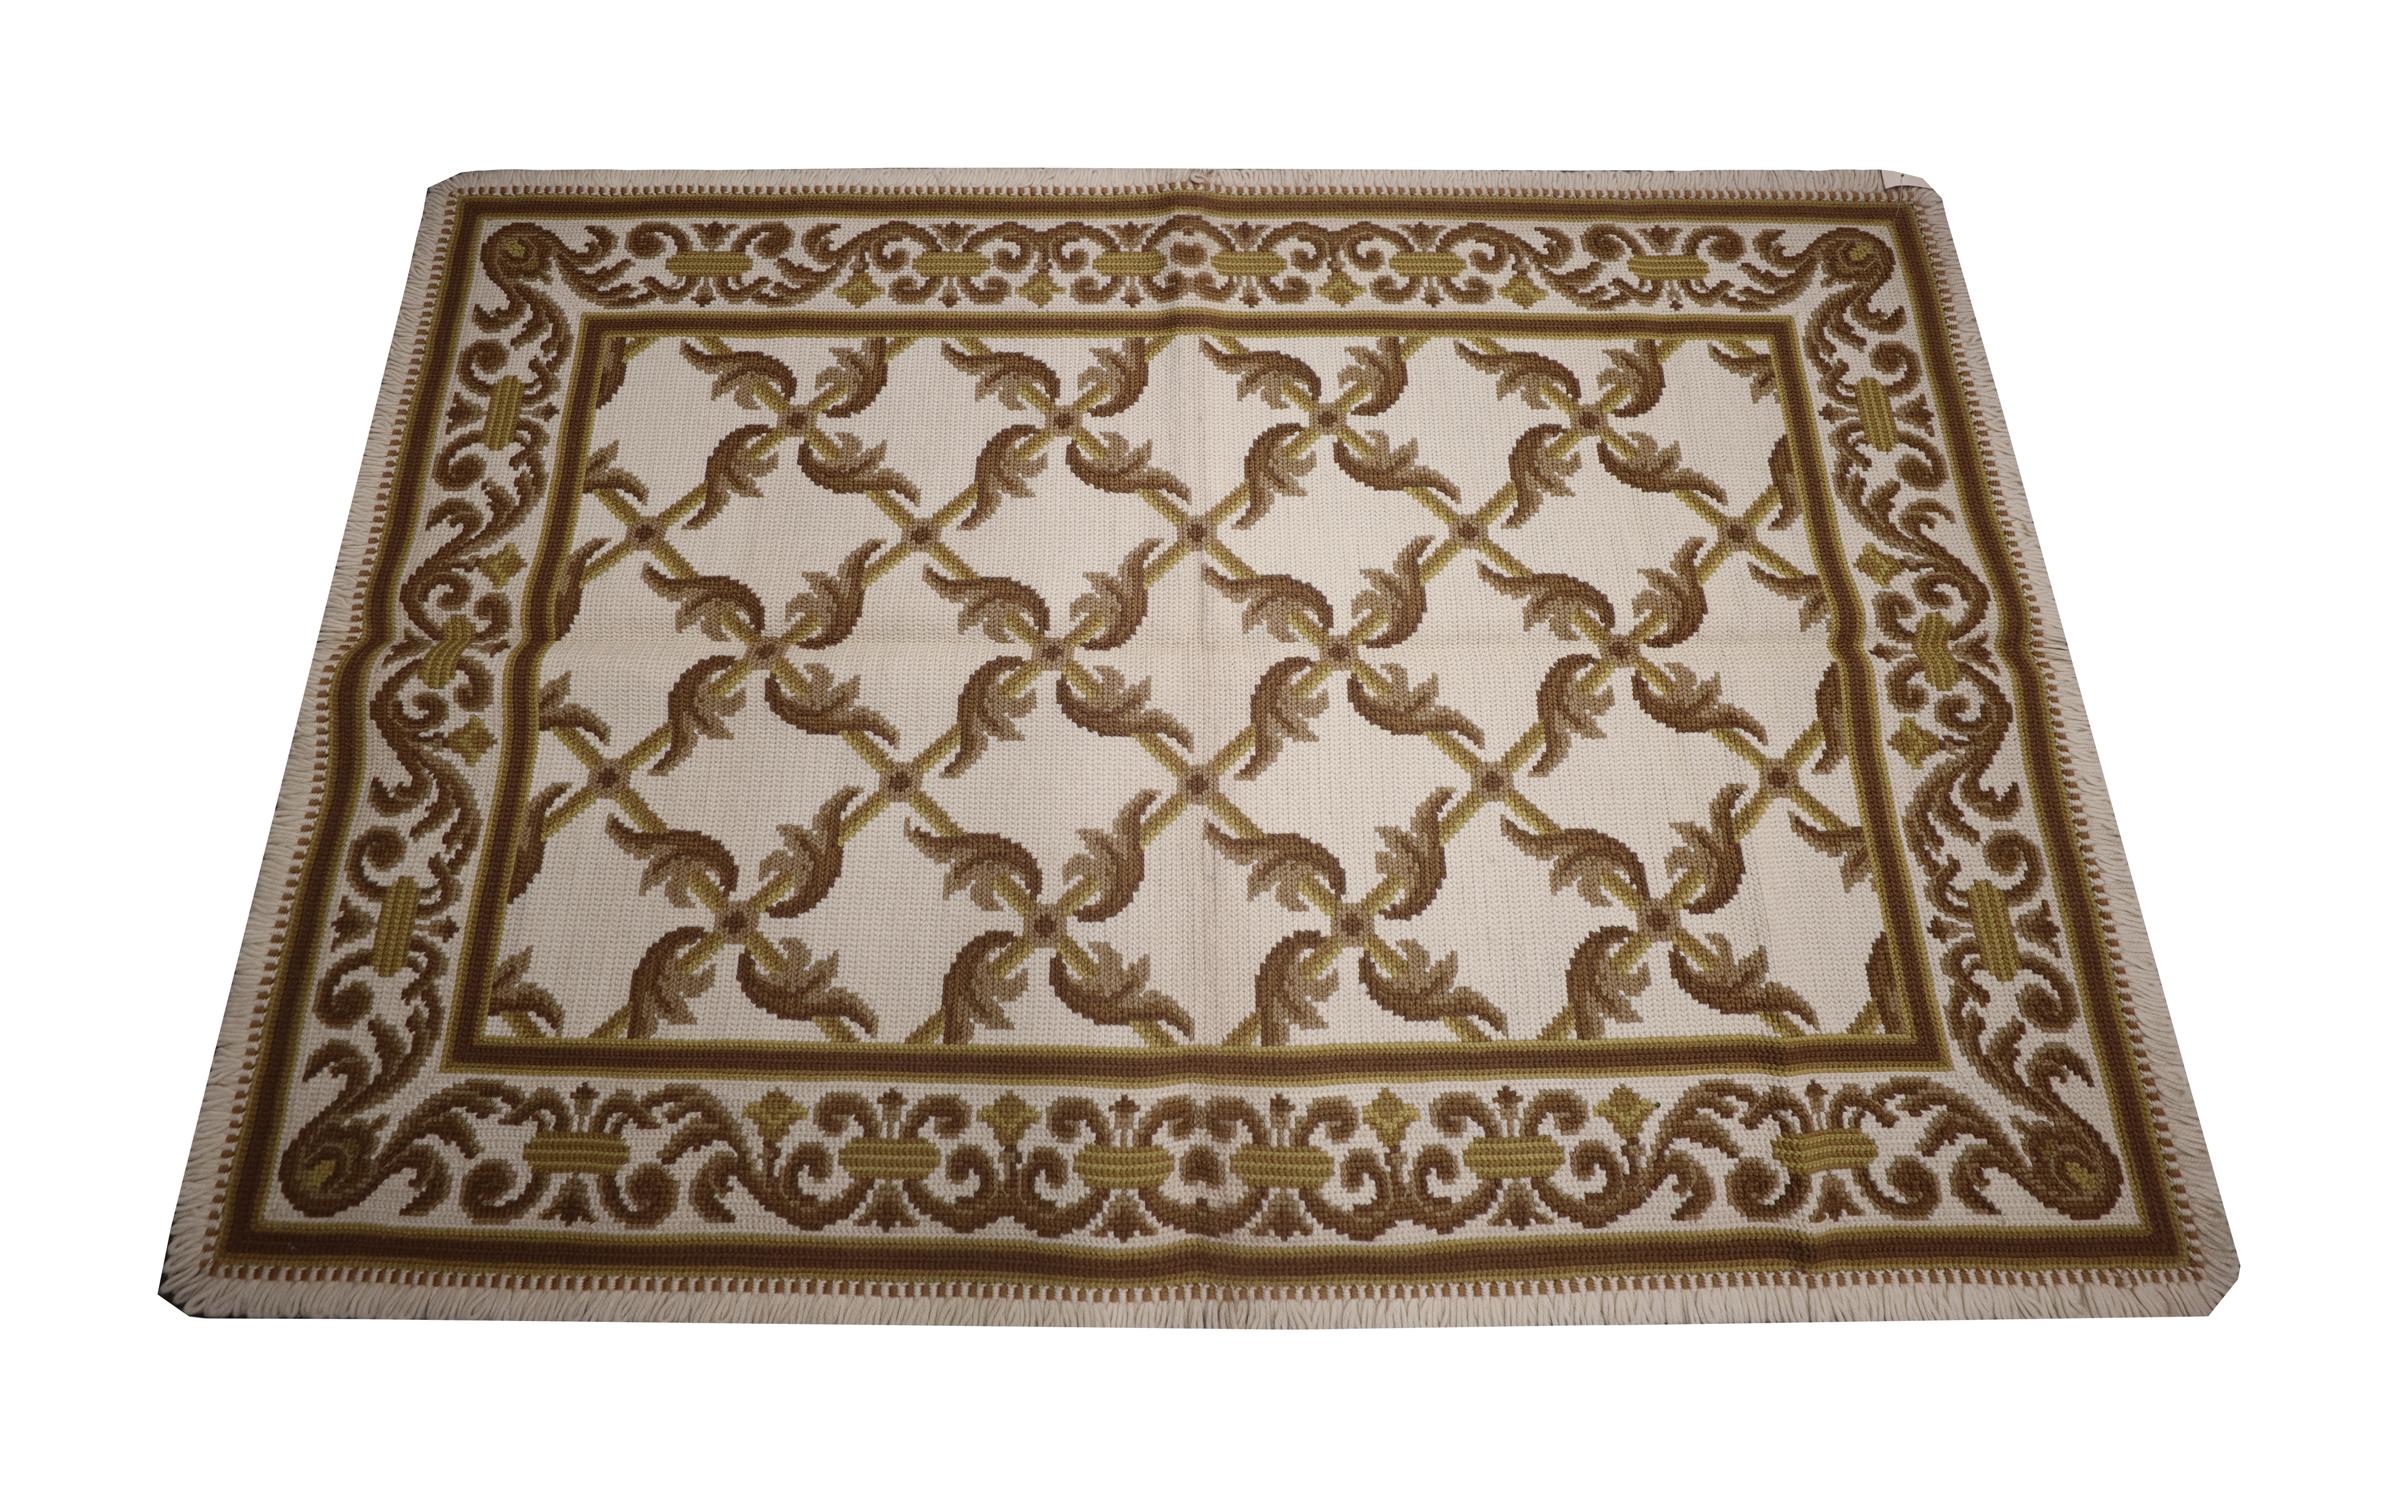 On the lookout for a new carpet to enhance your living room or bedroom? This Beautiful rug could make the perfect accessory. This elegant wool needlepoint is a classic example of a modern Portuguese style rug woven by hand in China in the early 21st